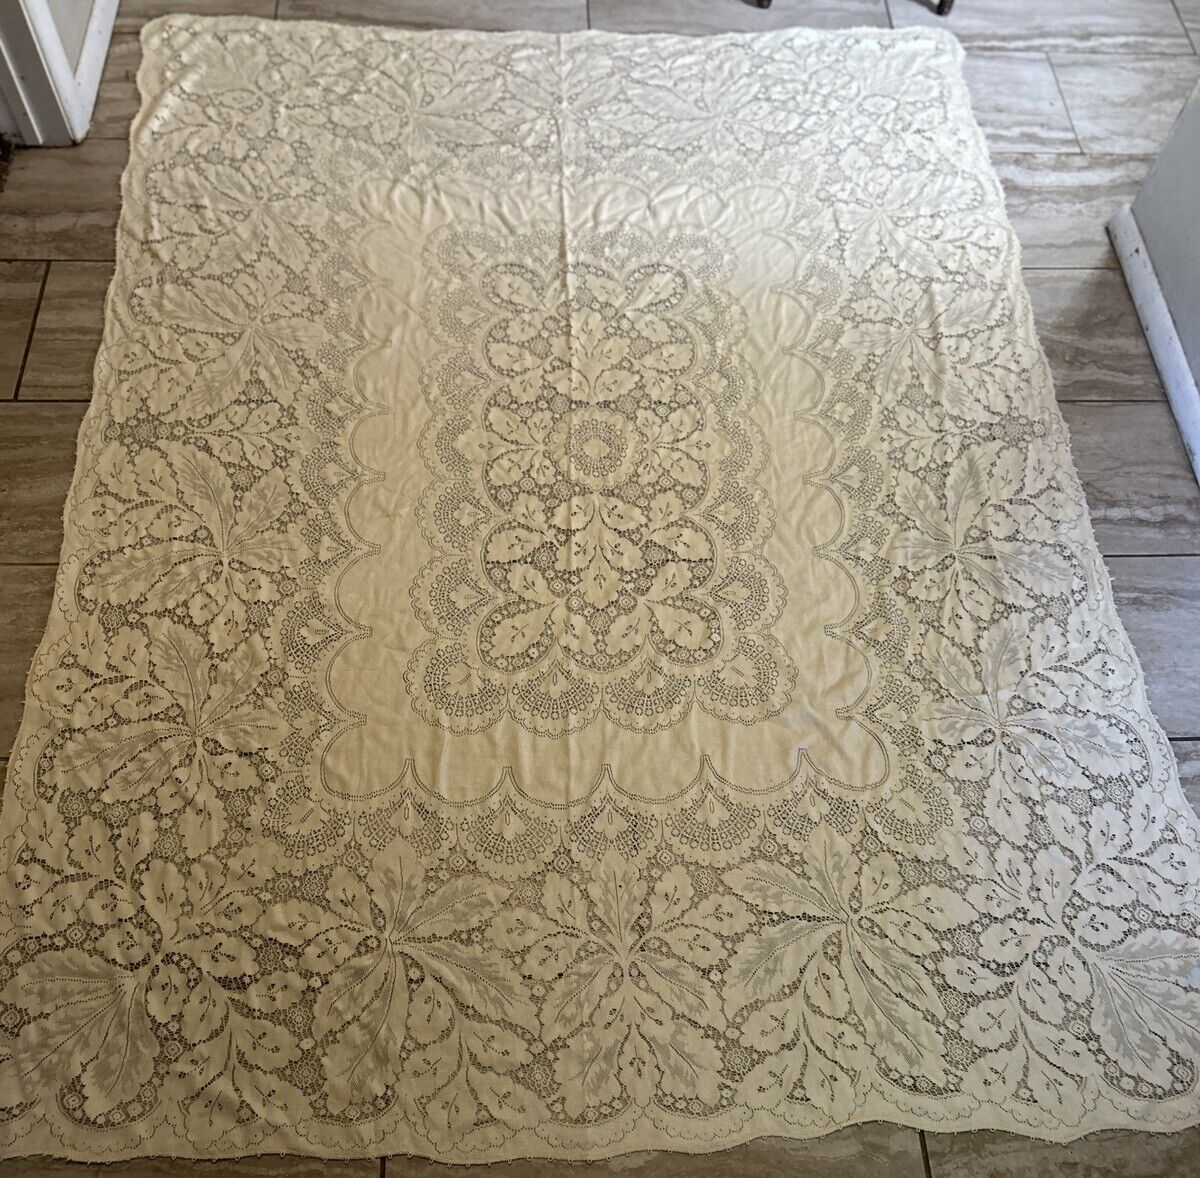 Antique Vintage Off White Rectangle Lace Tablecloth 81x60 In.